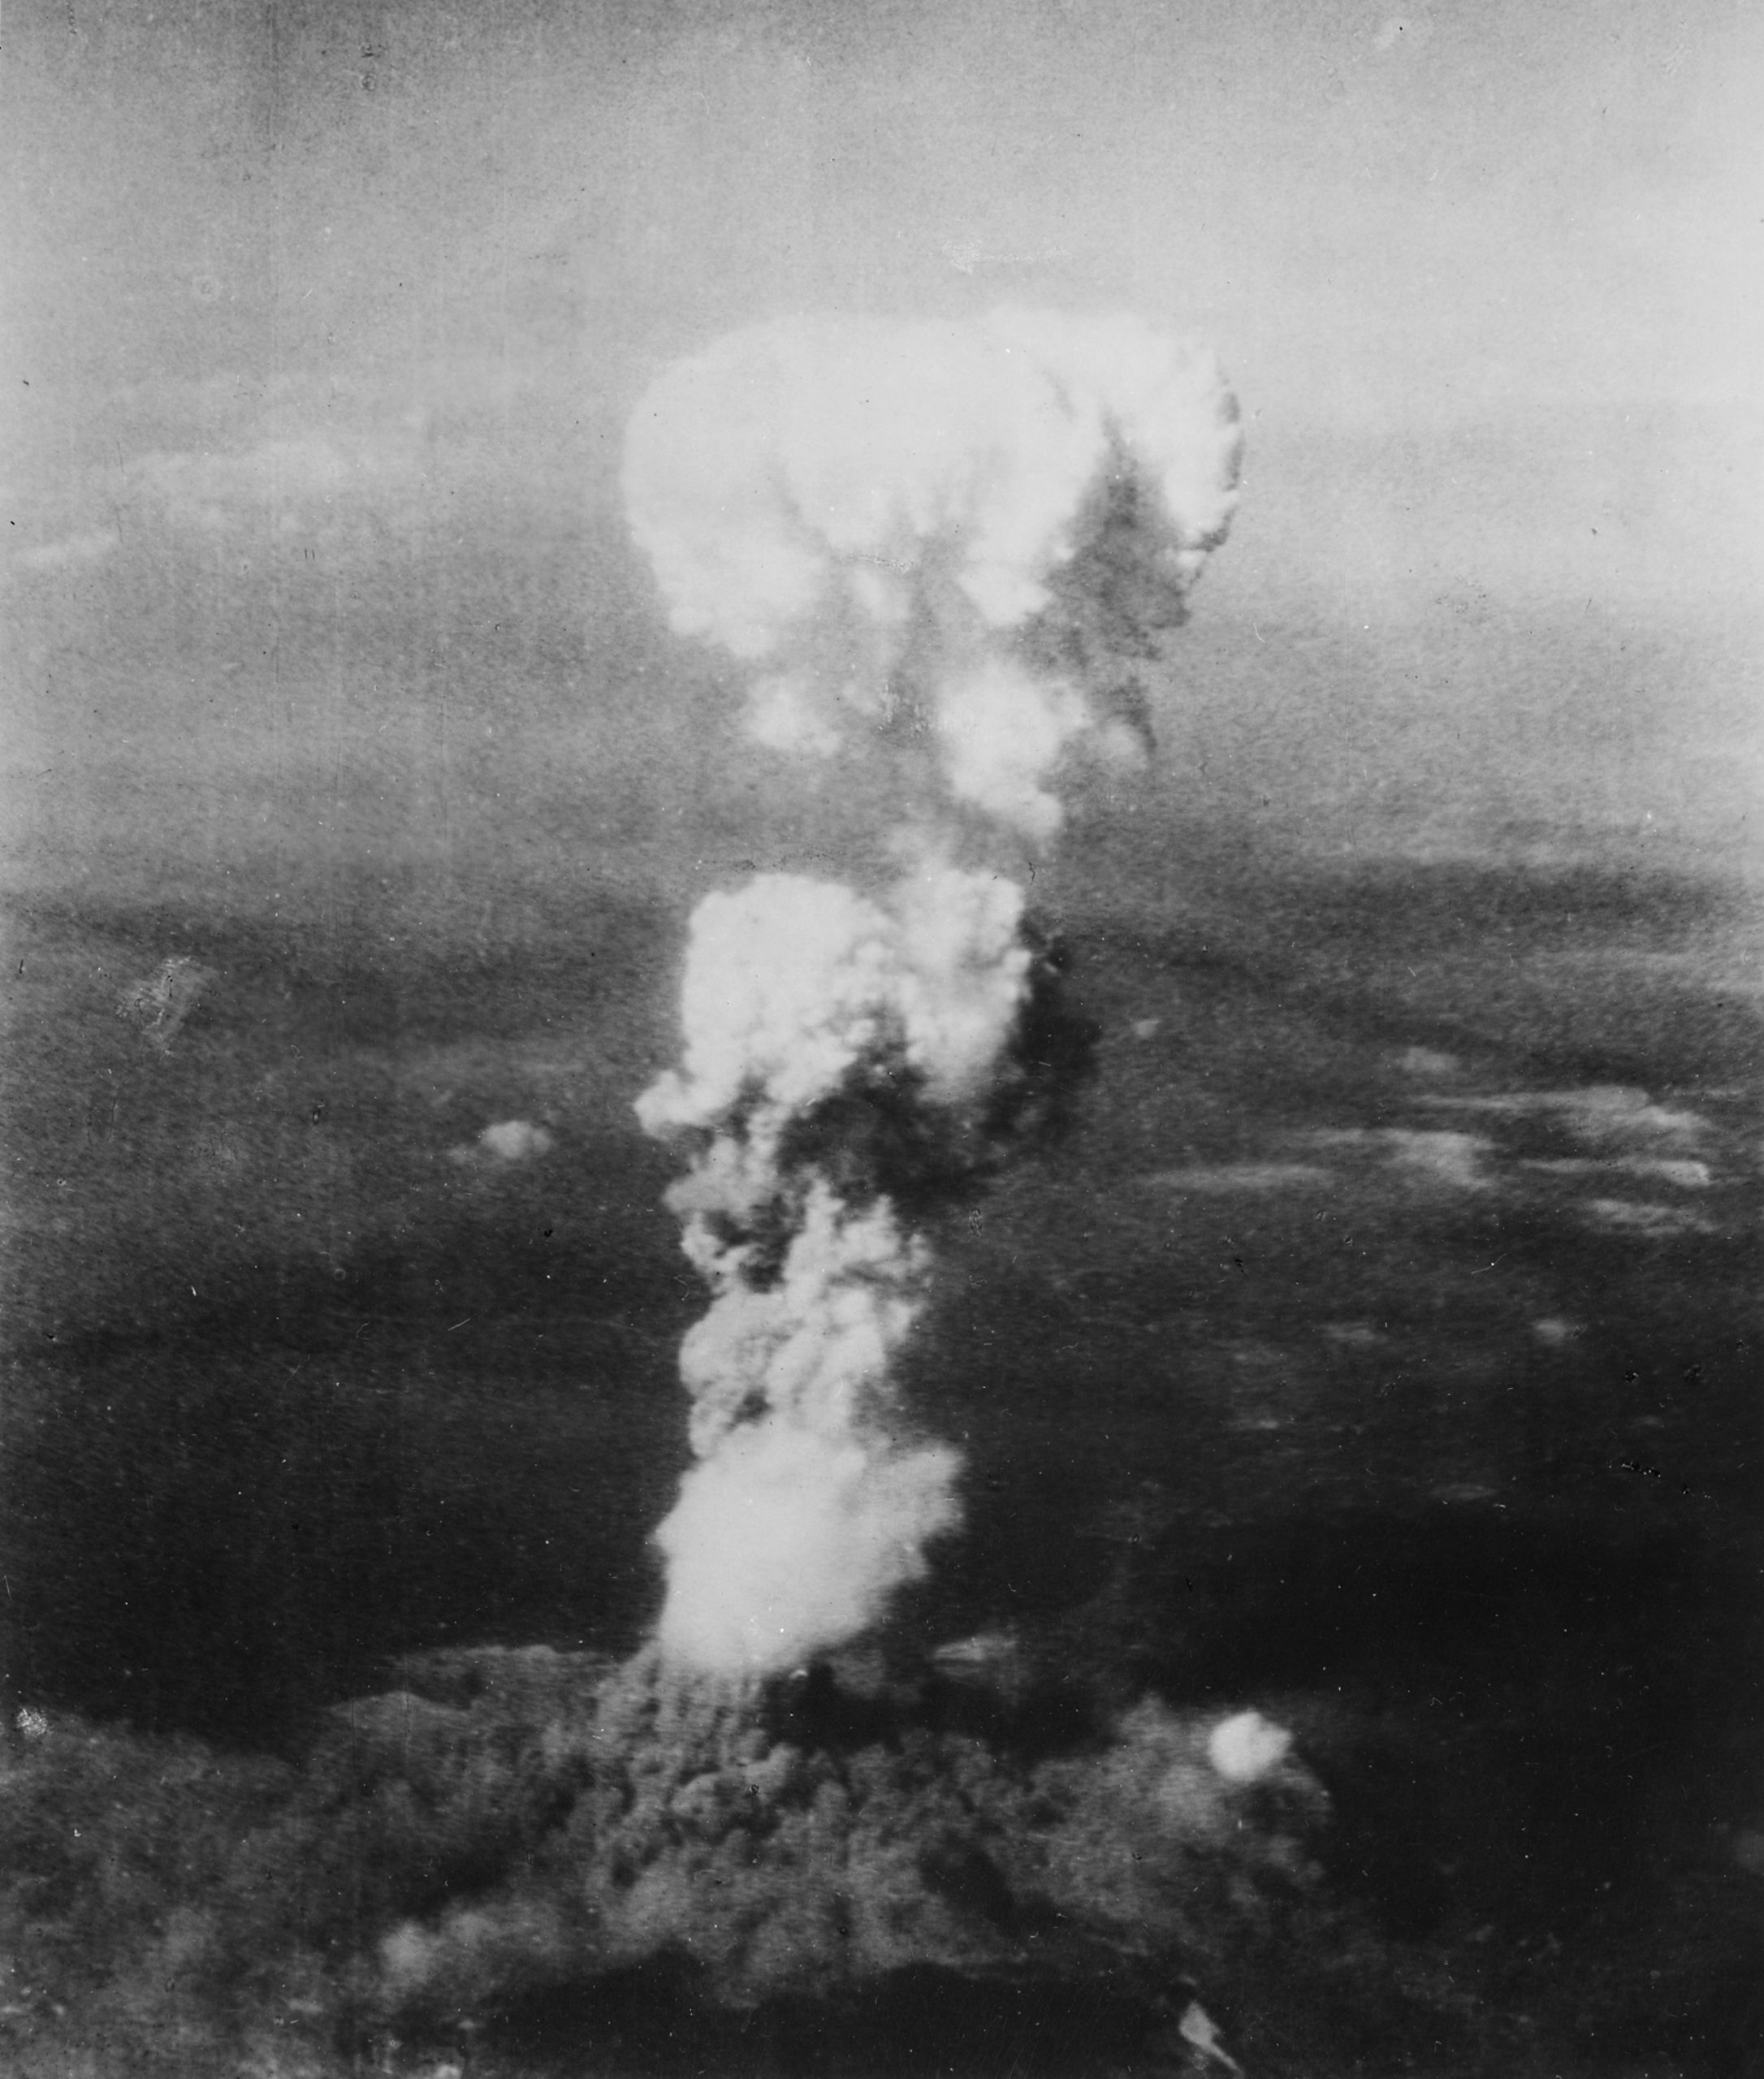 Fig. 1: Unknown photographer. 1945. «Atomic Cloud Over Hiroshima» [Photograph]
